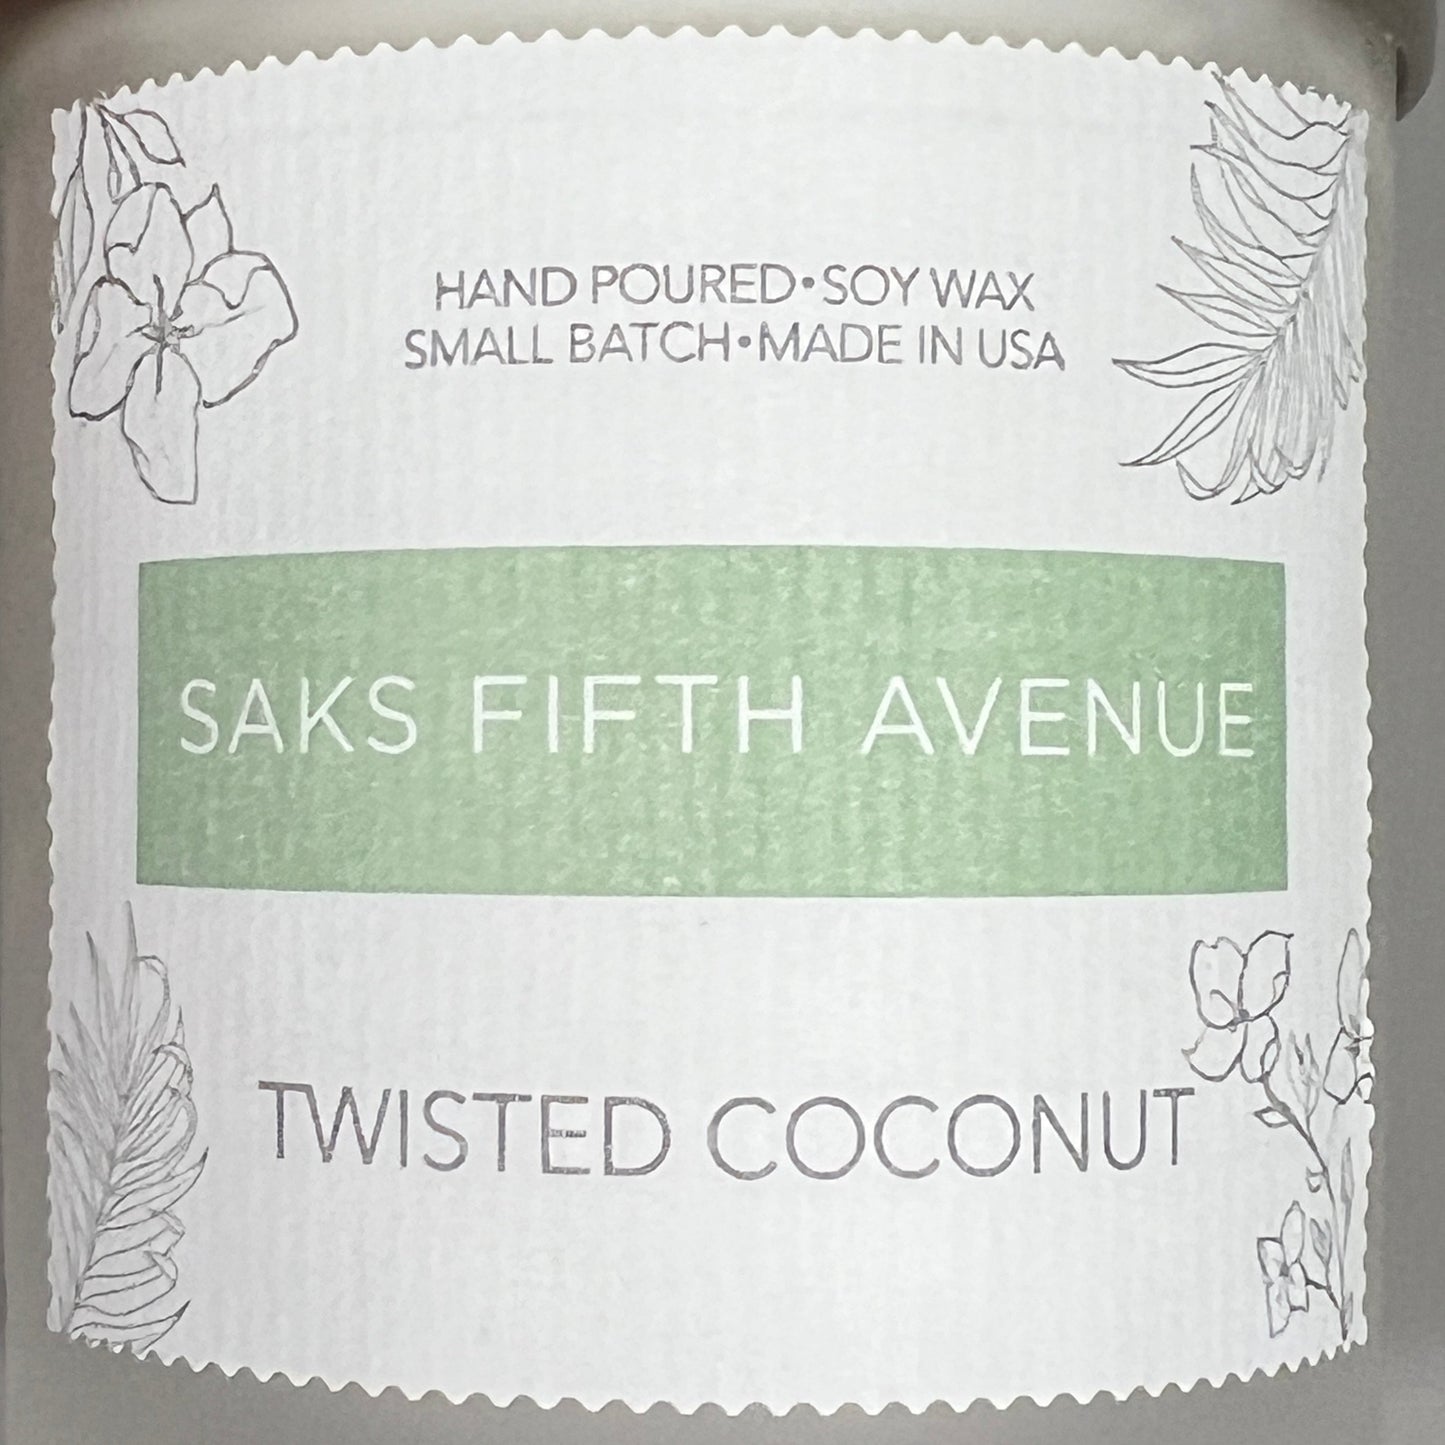 SAKS FIFTH AVENUE Twisted Coconut Hand Poured Soy Wax Candle 8 fl oz LOT OF 4! (New)